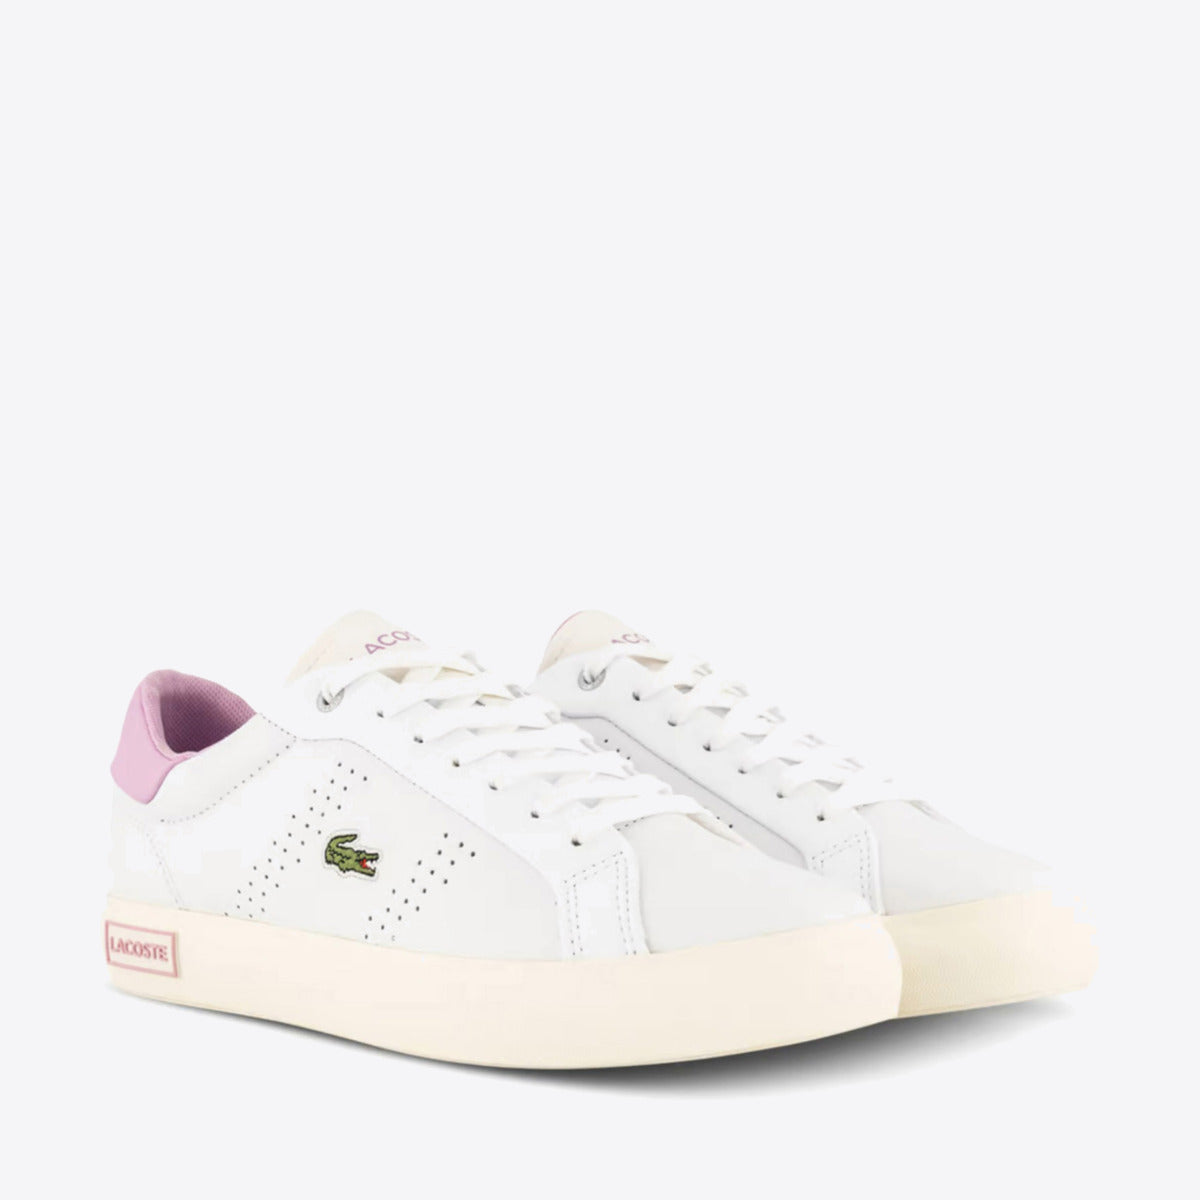 LACOSTE Powercourt 2.0 White/Pink - Image 2